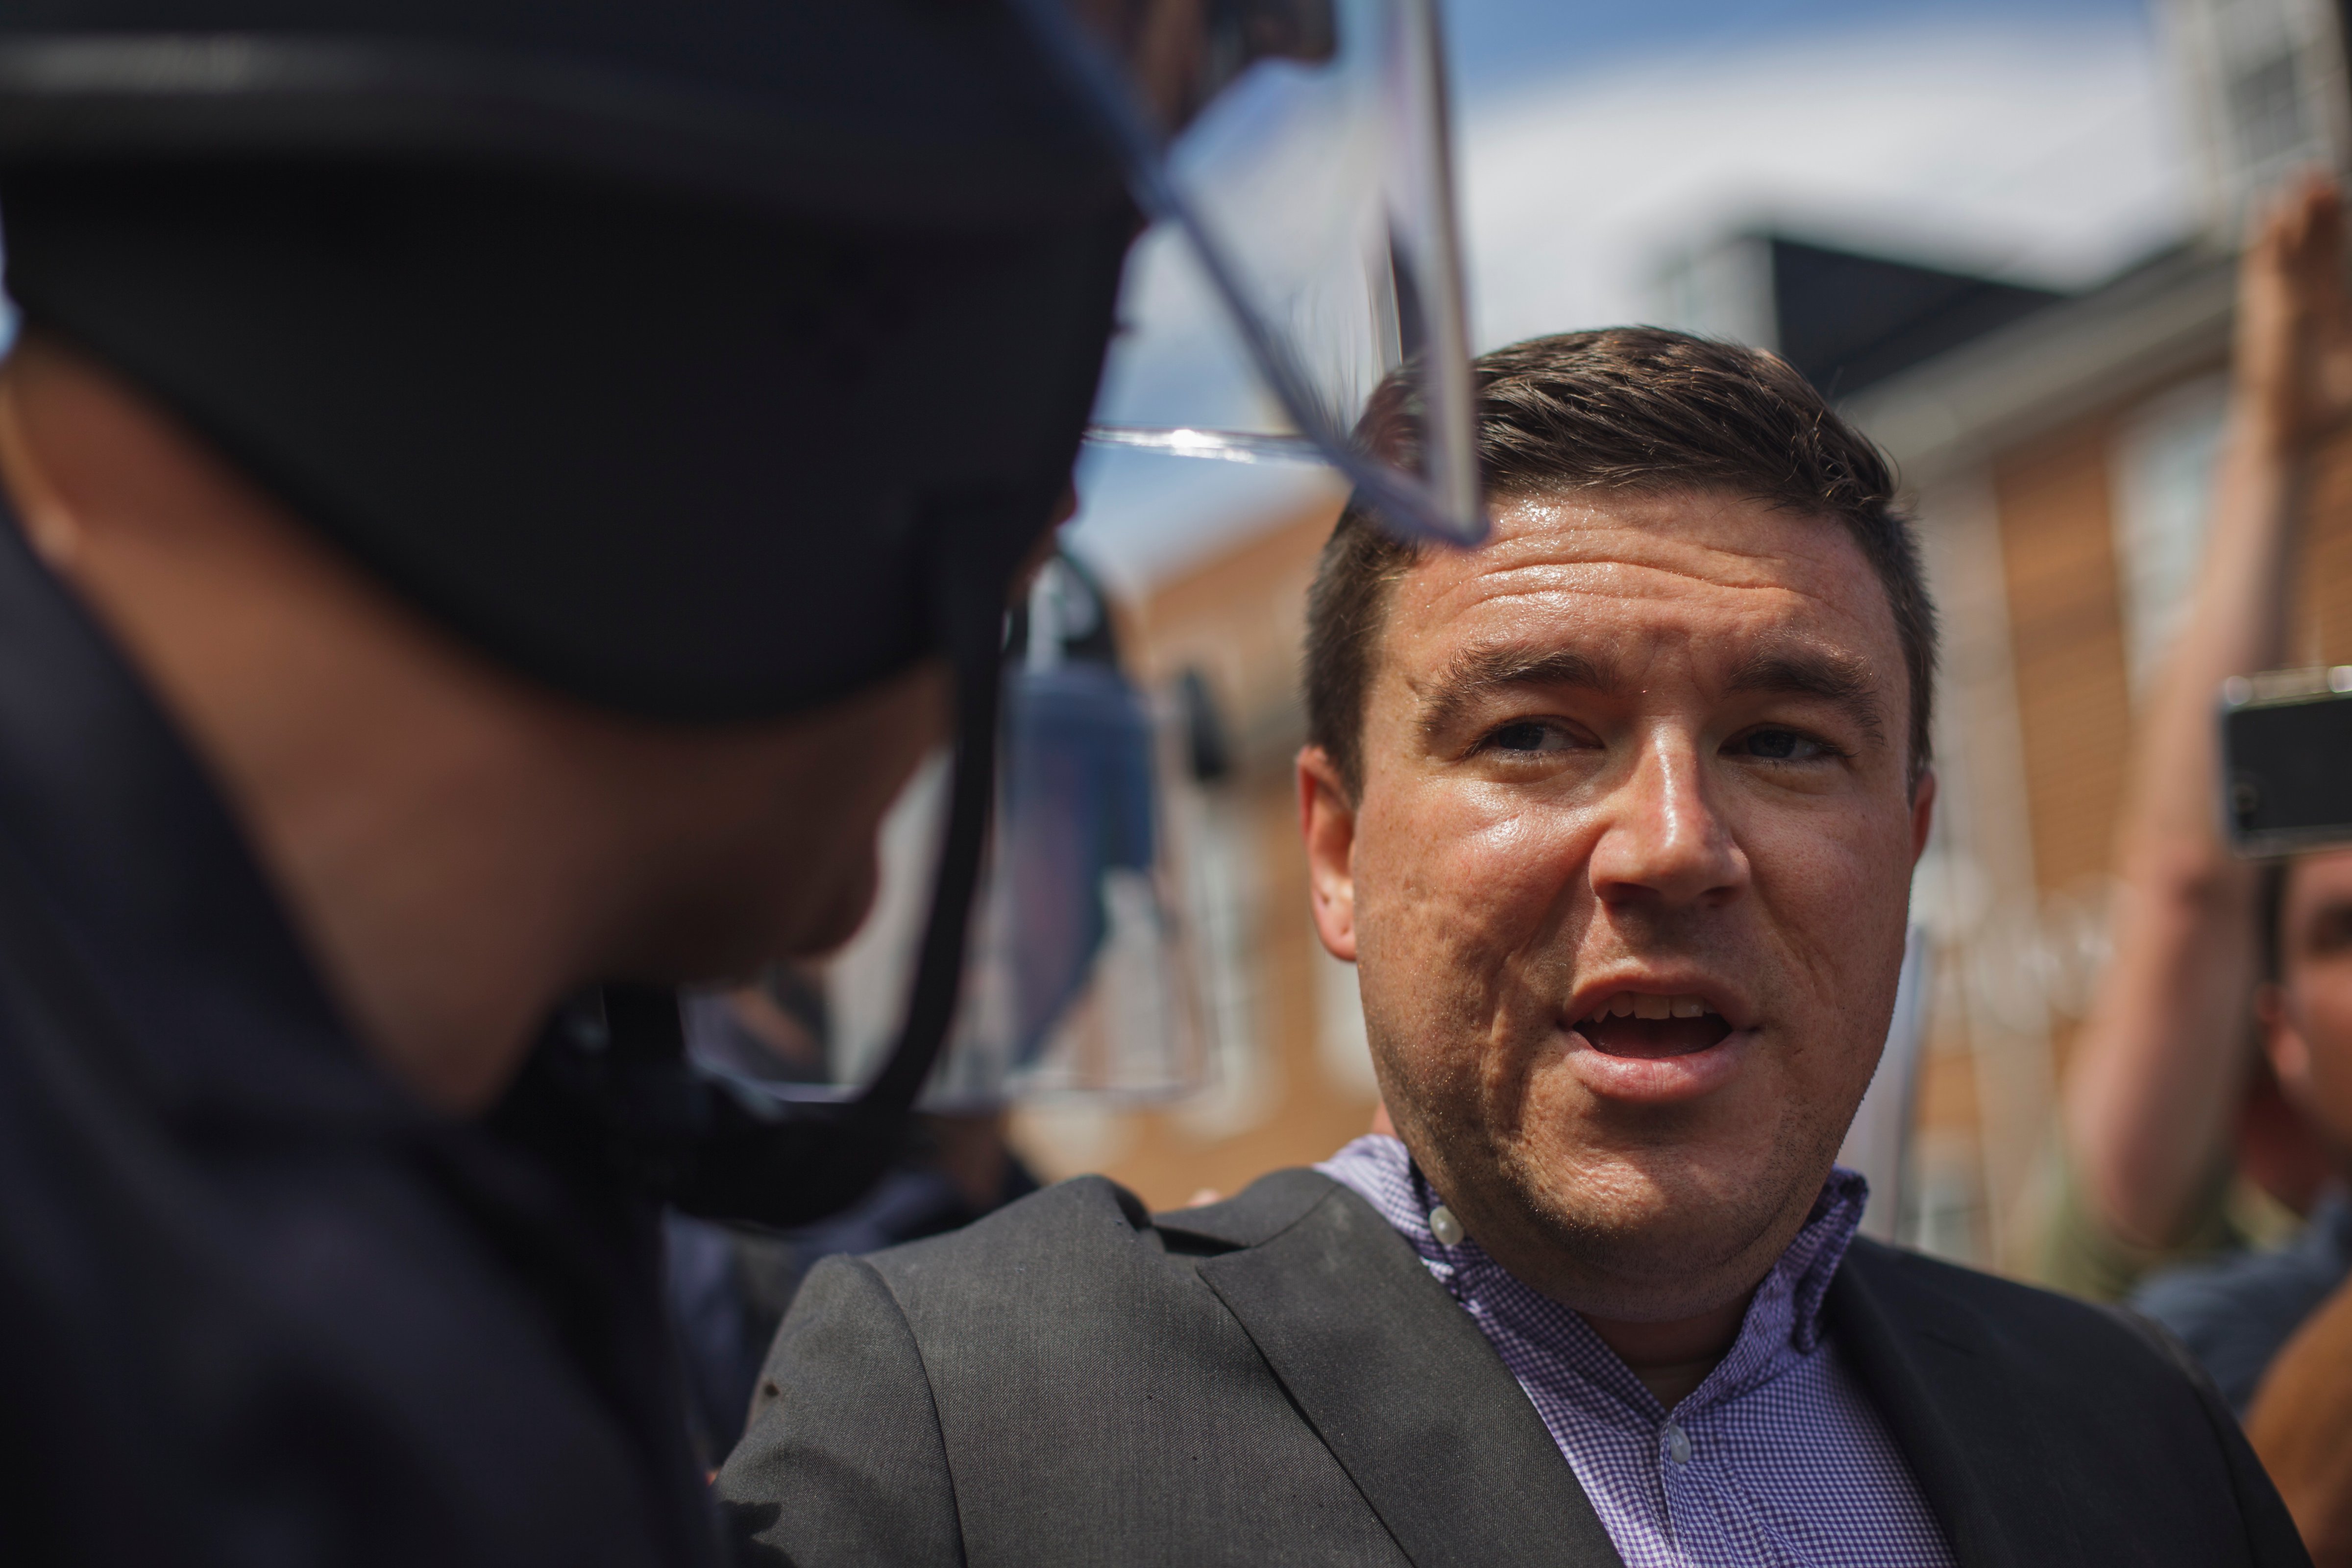 Jason Kessler, one of the main organizers for the Unite The Right Rally in Charlottesville, Virginia (Shay Horse—NurPhoto/Getty Images)